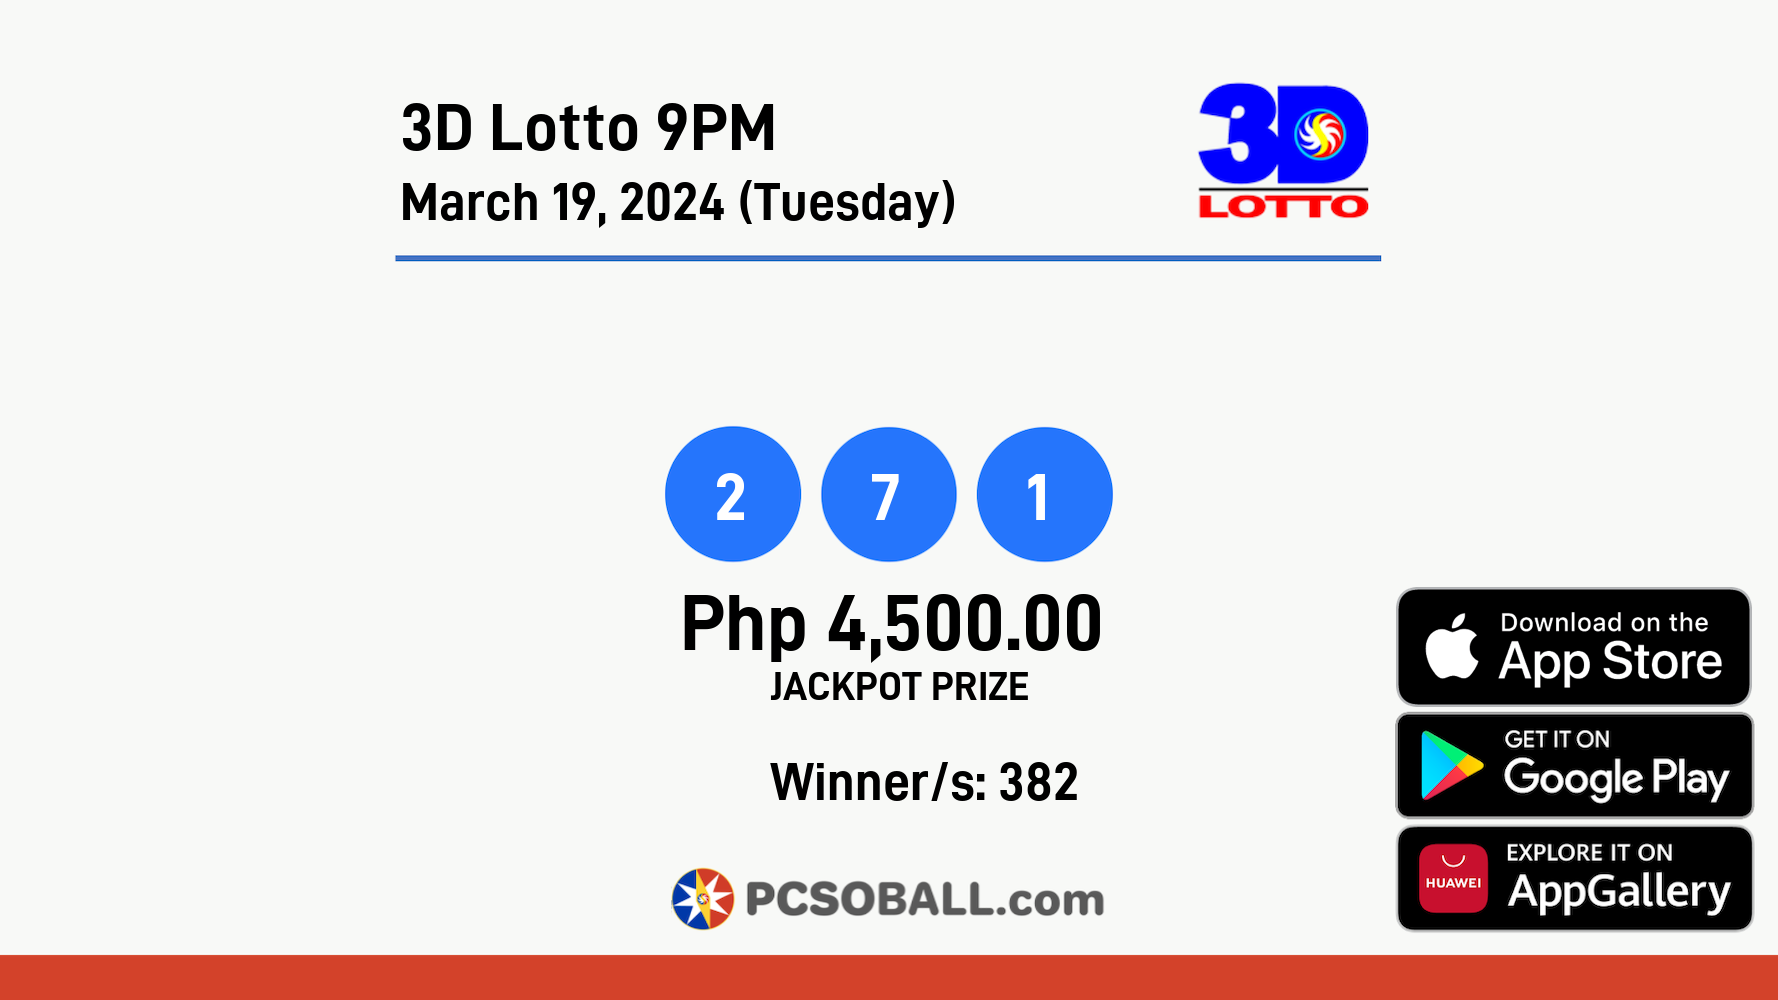 3D Lotto 9PM March 19, 2024 (Tuesday) Result